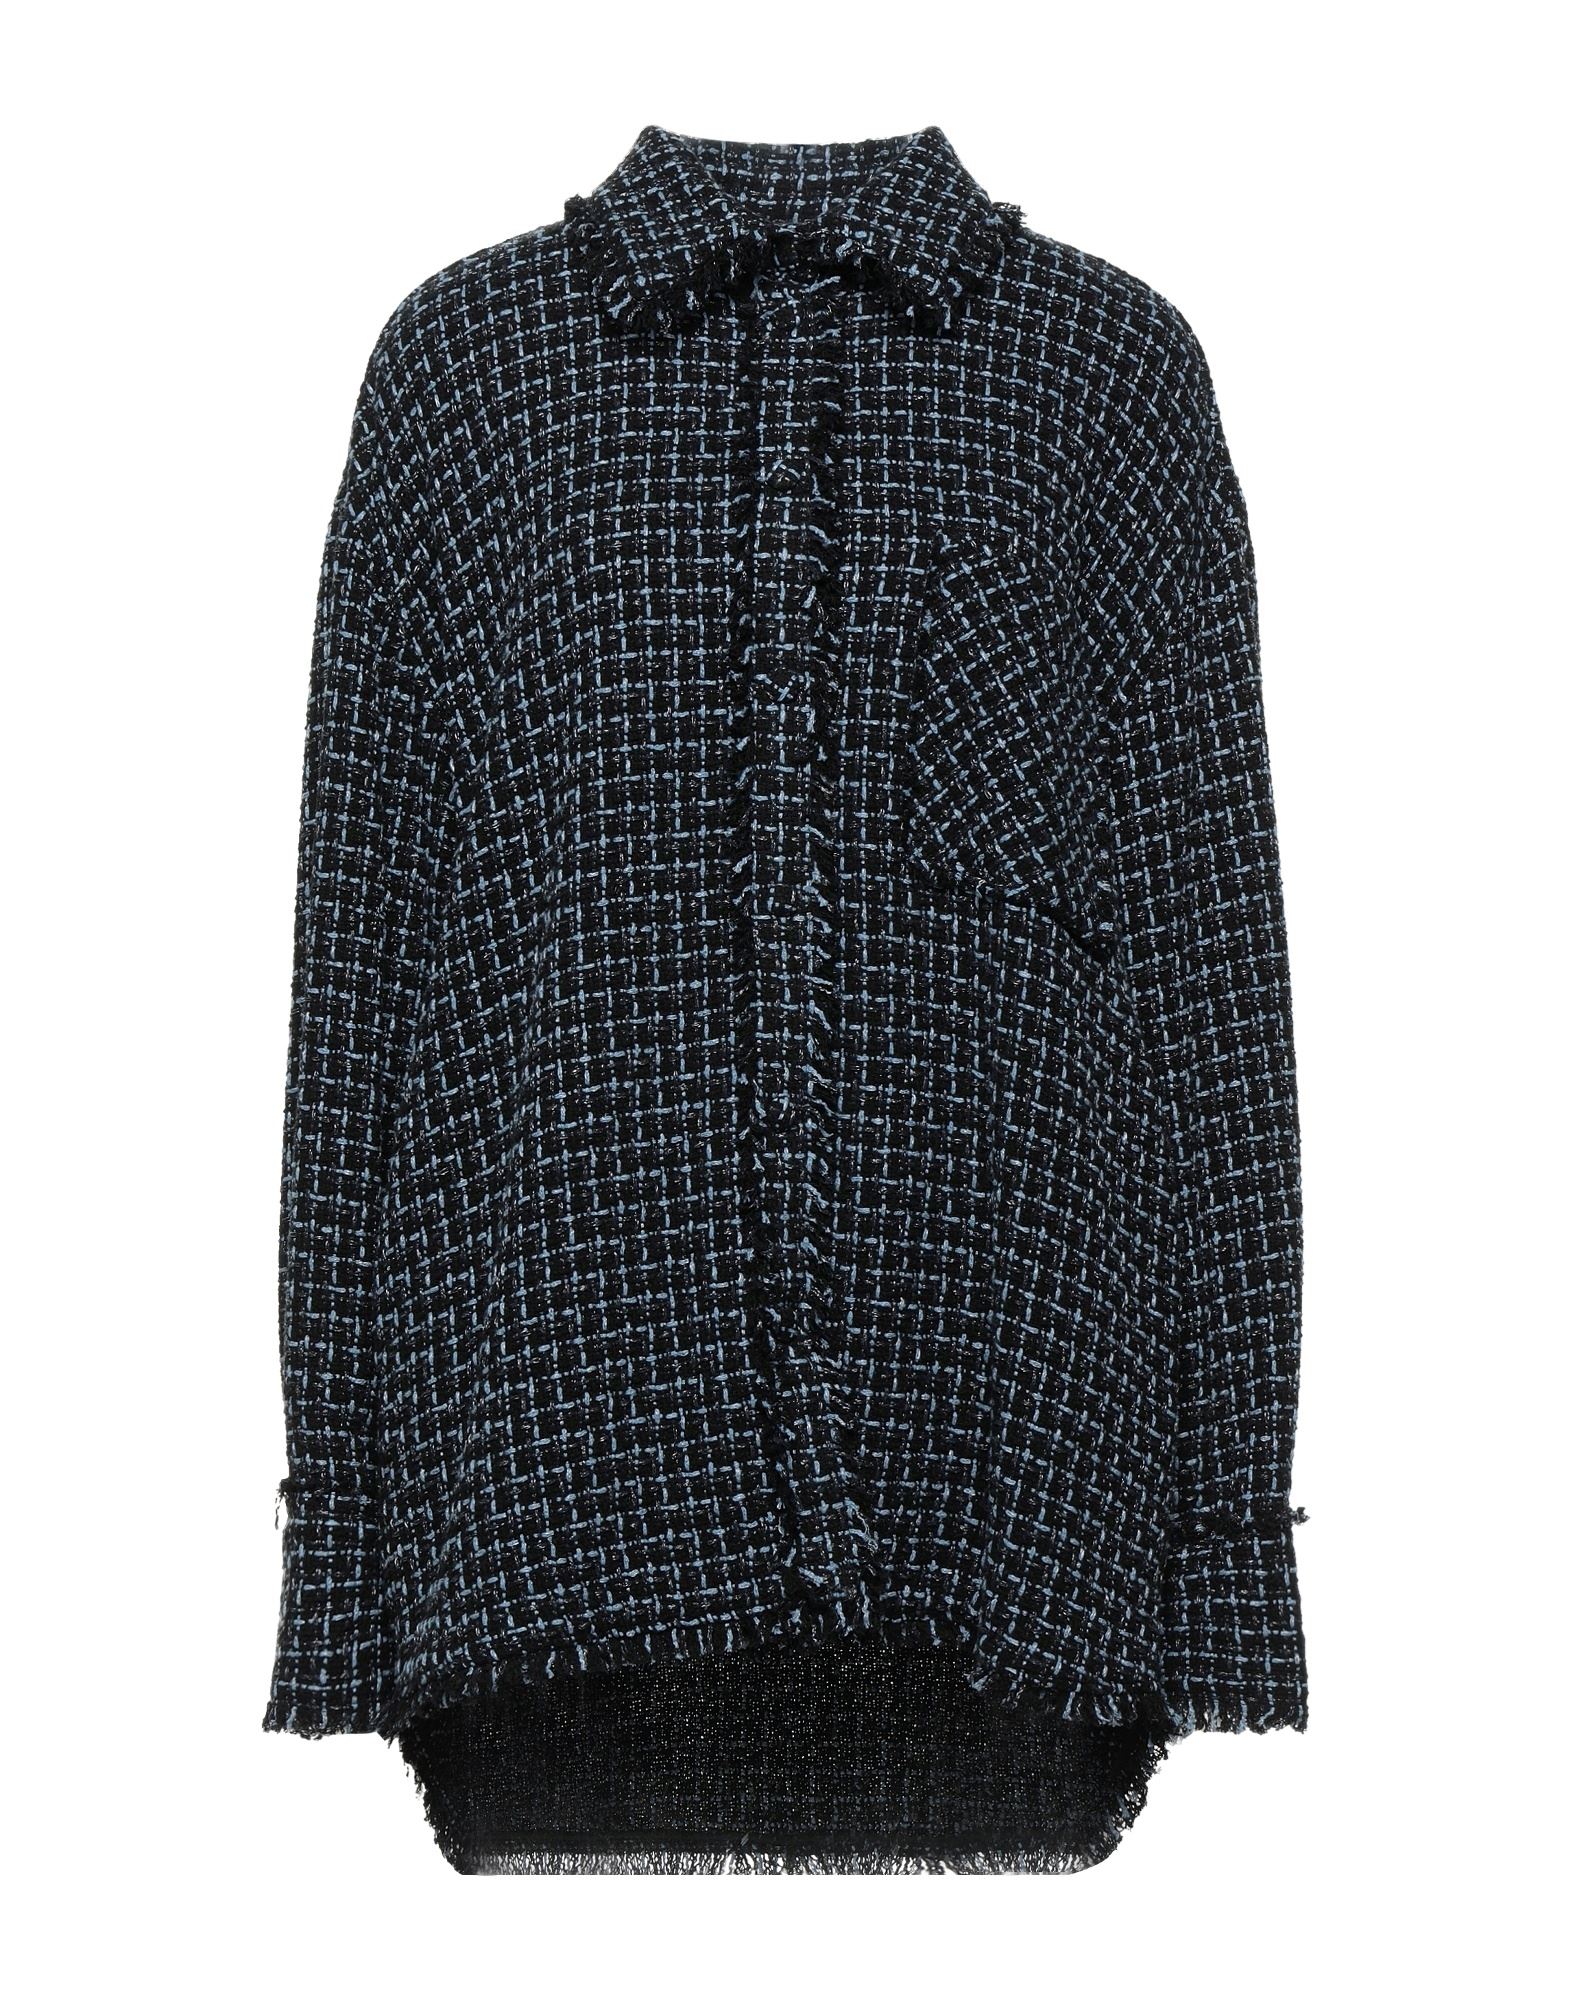 Msgm Shirts In Blue